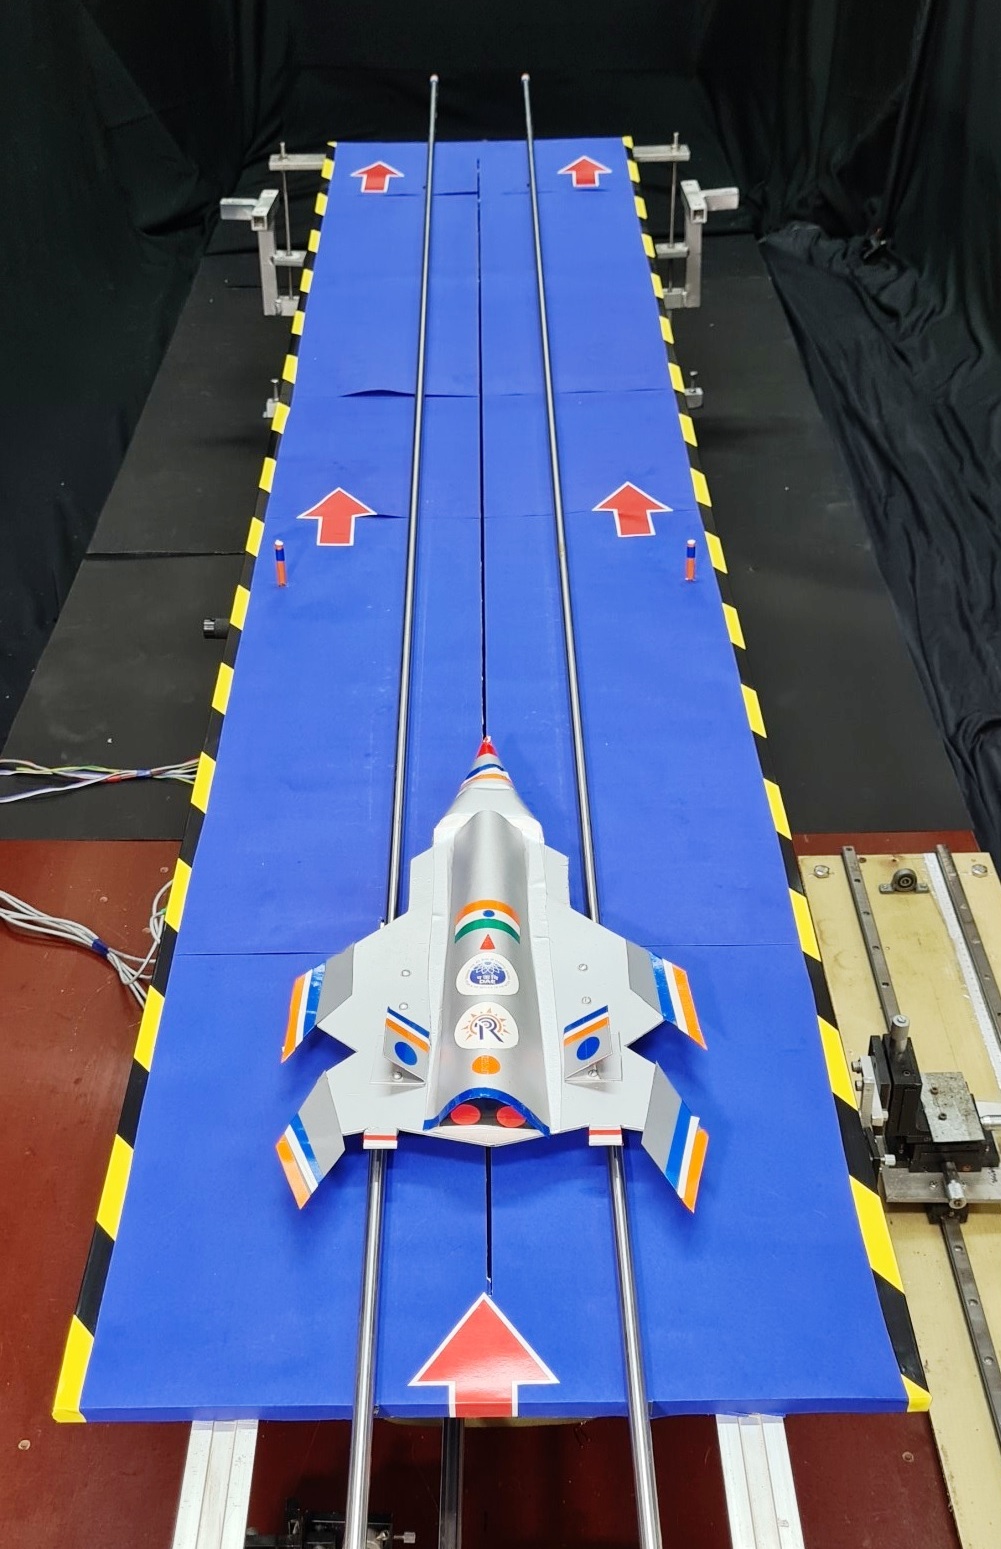 The model aircraft being launched using the Electromagnetic acceleration systems .jpg